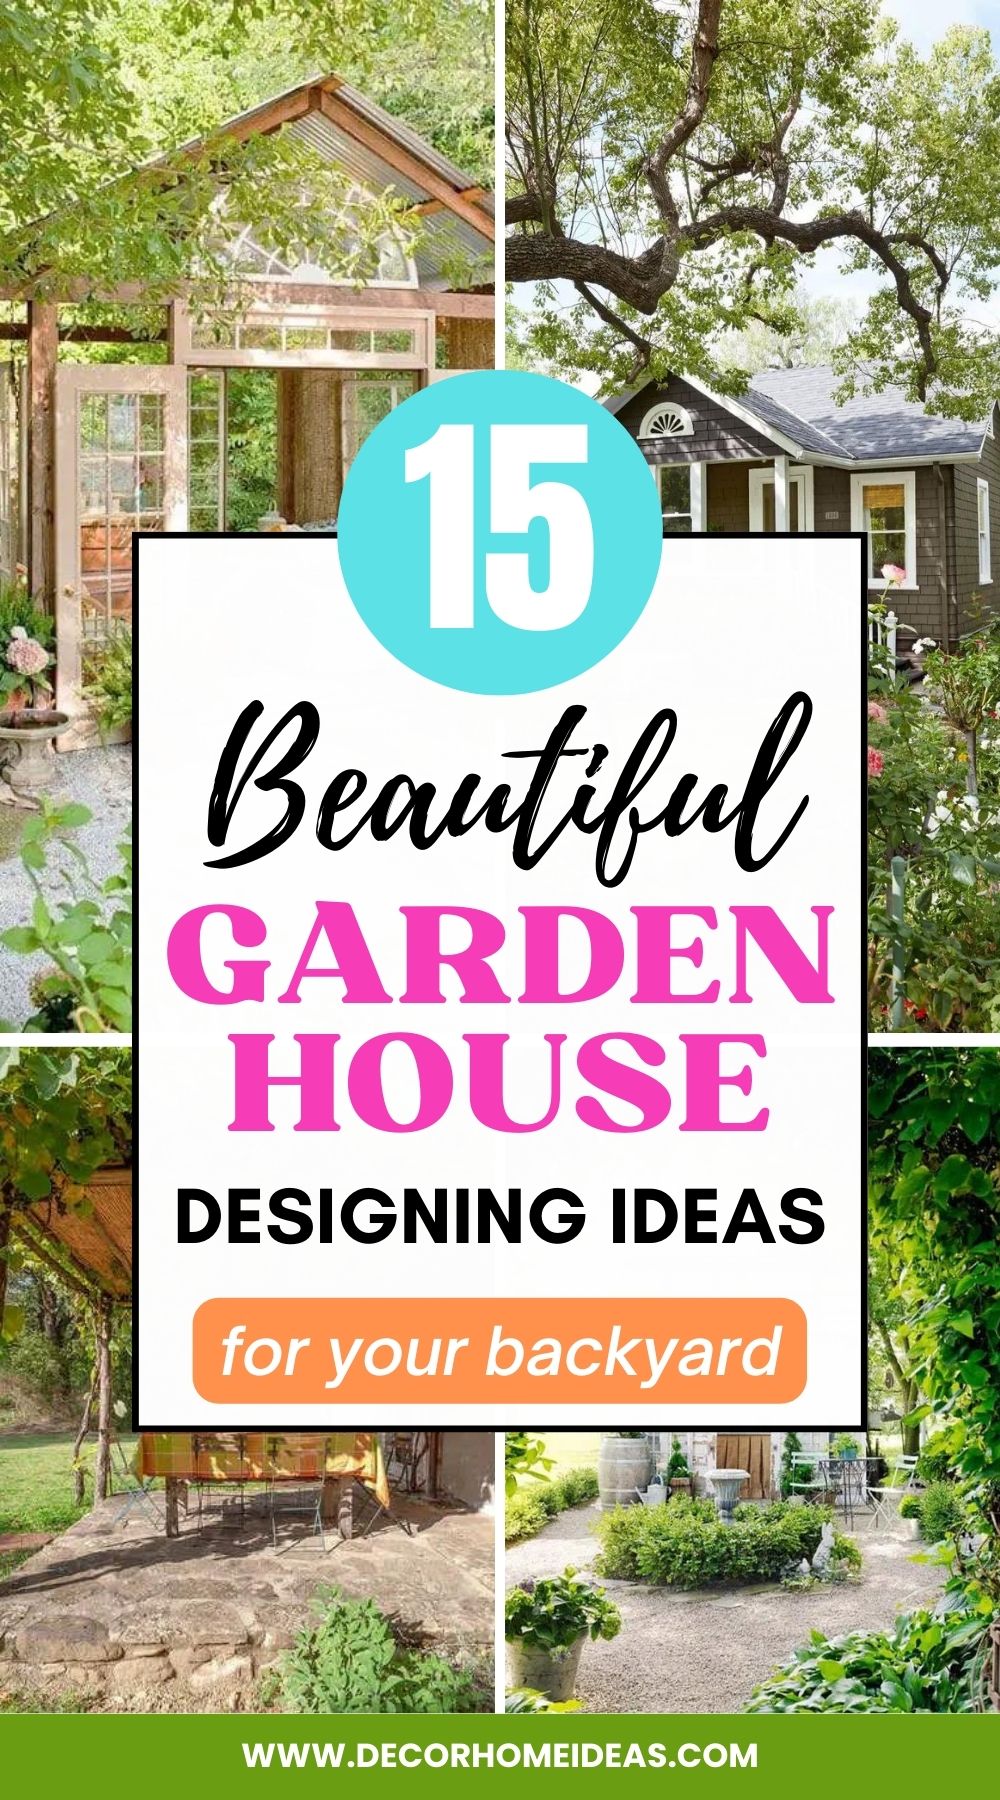 Get inspired with 15 unique garden house designing ideas. Create the perfect outdoor living space with these creative tips and tricks.